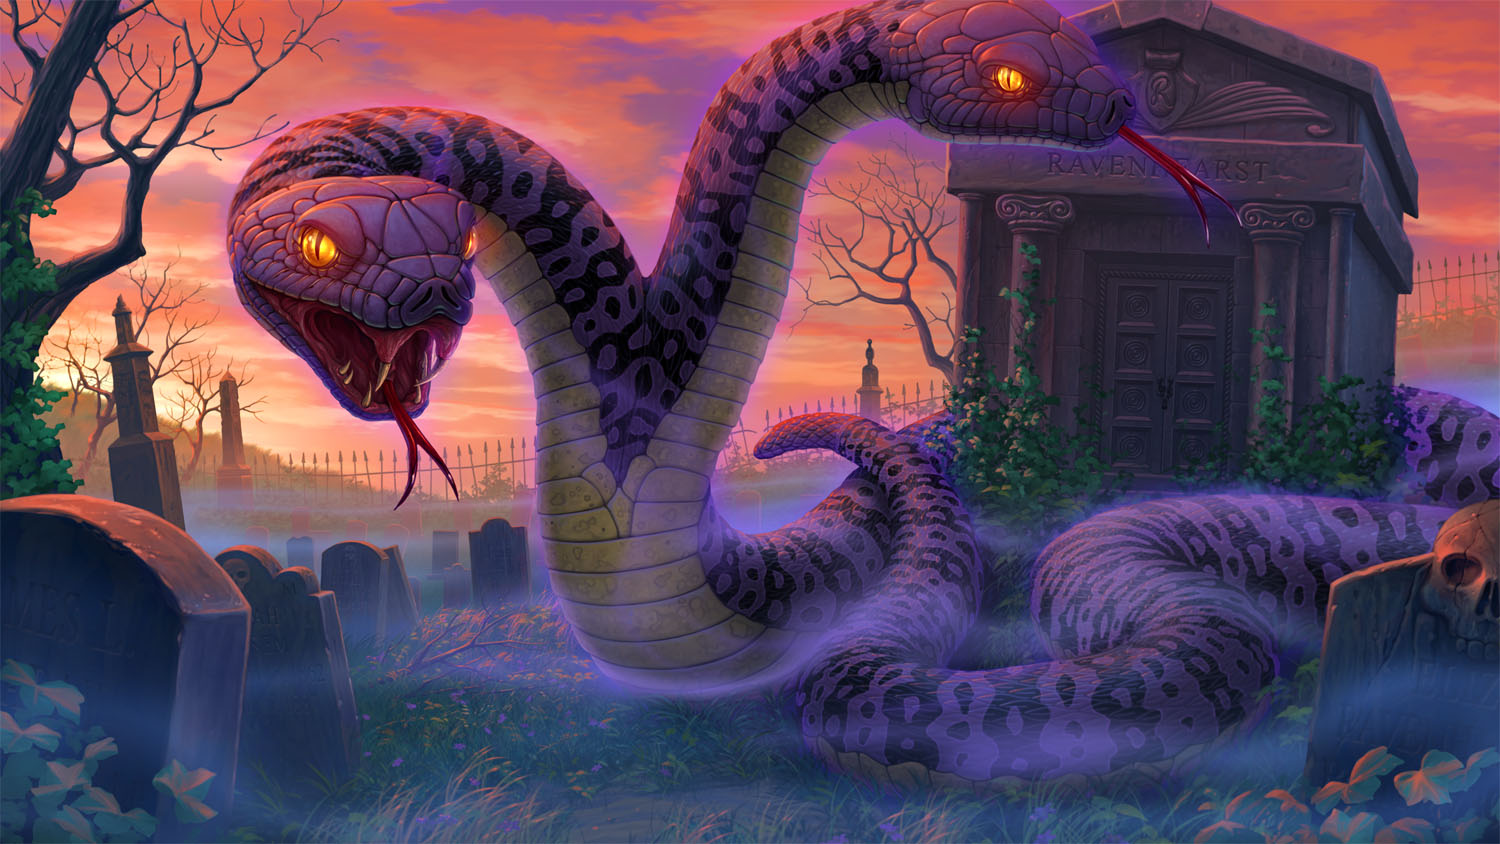 "Serpents in the Graveyard"